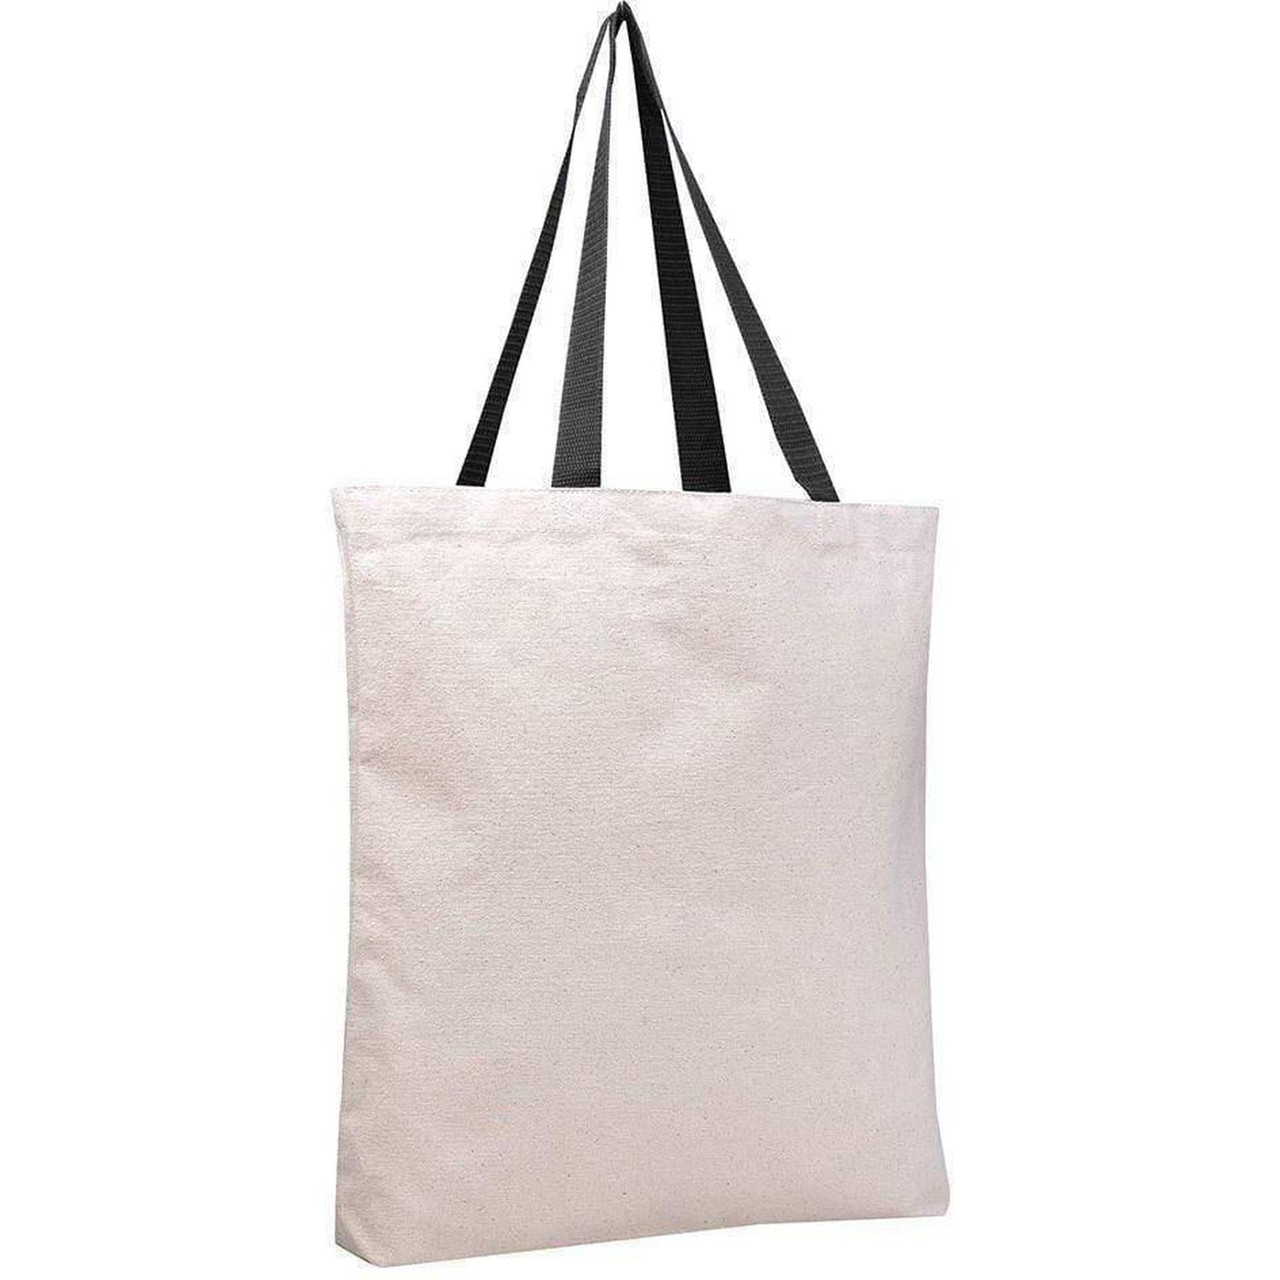 High Quality Promotional Canvas Tote Bags w/Gusset - TG200 | Canvas tote  bags, Canvas tote, Bags